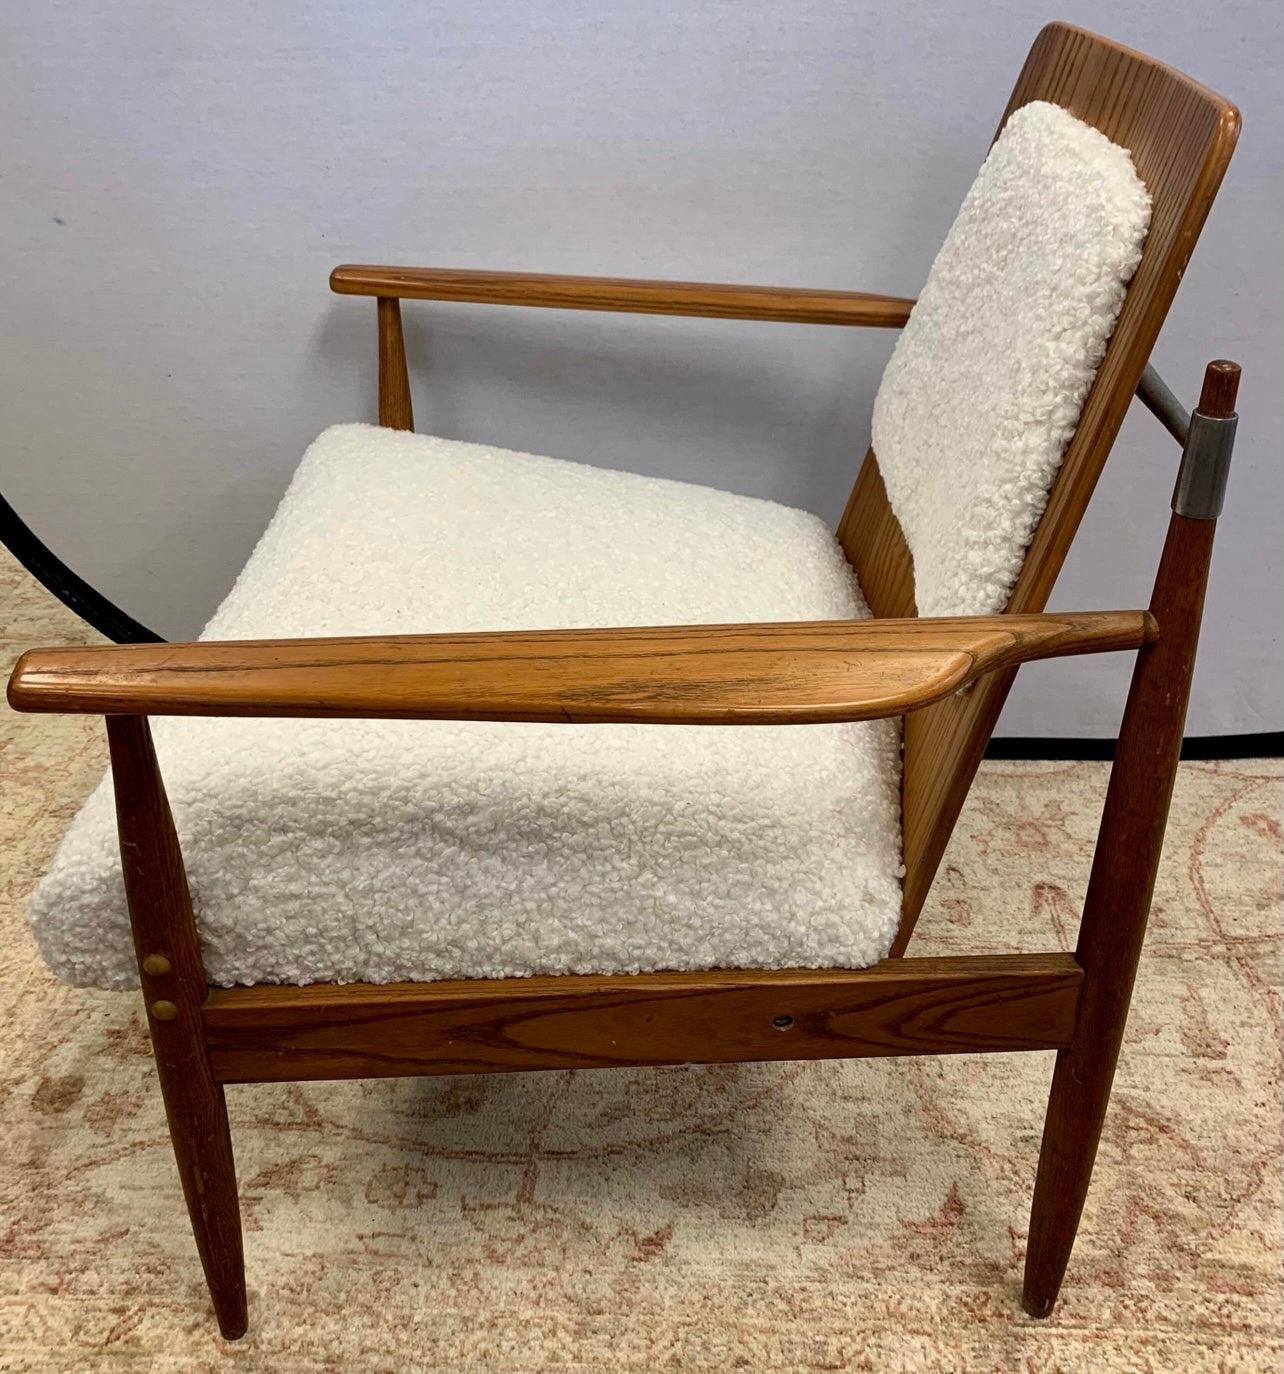 Mid-20th Century Sleek Mid-Century Modern Lounge Chair with New Boucle Upholstery